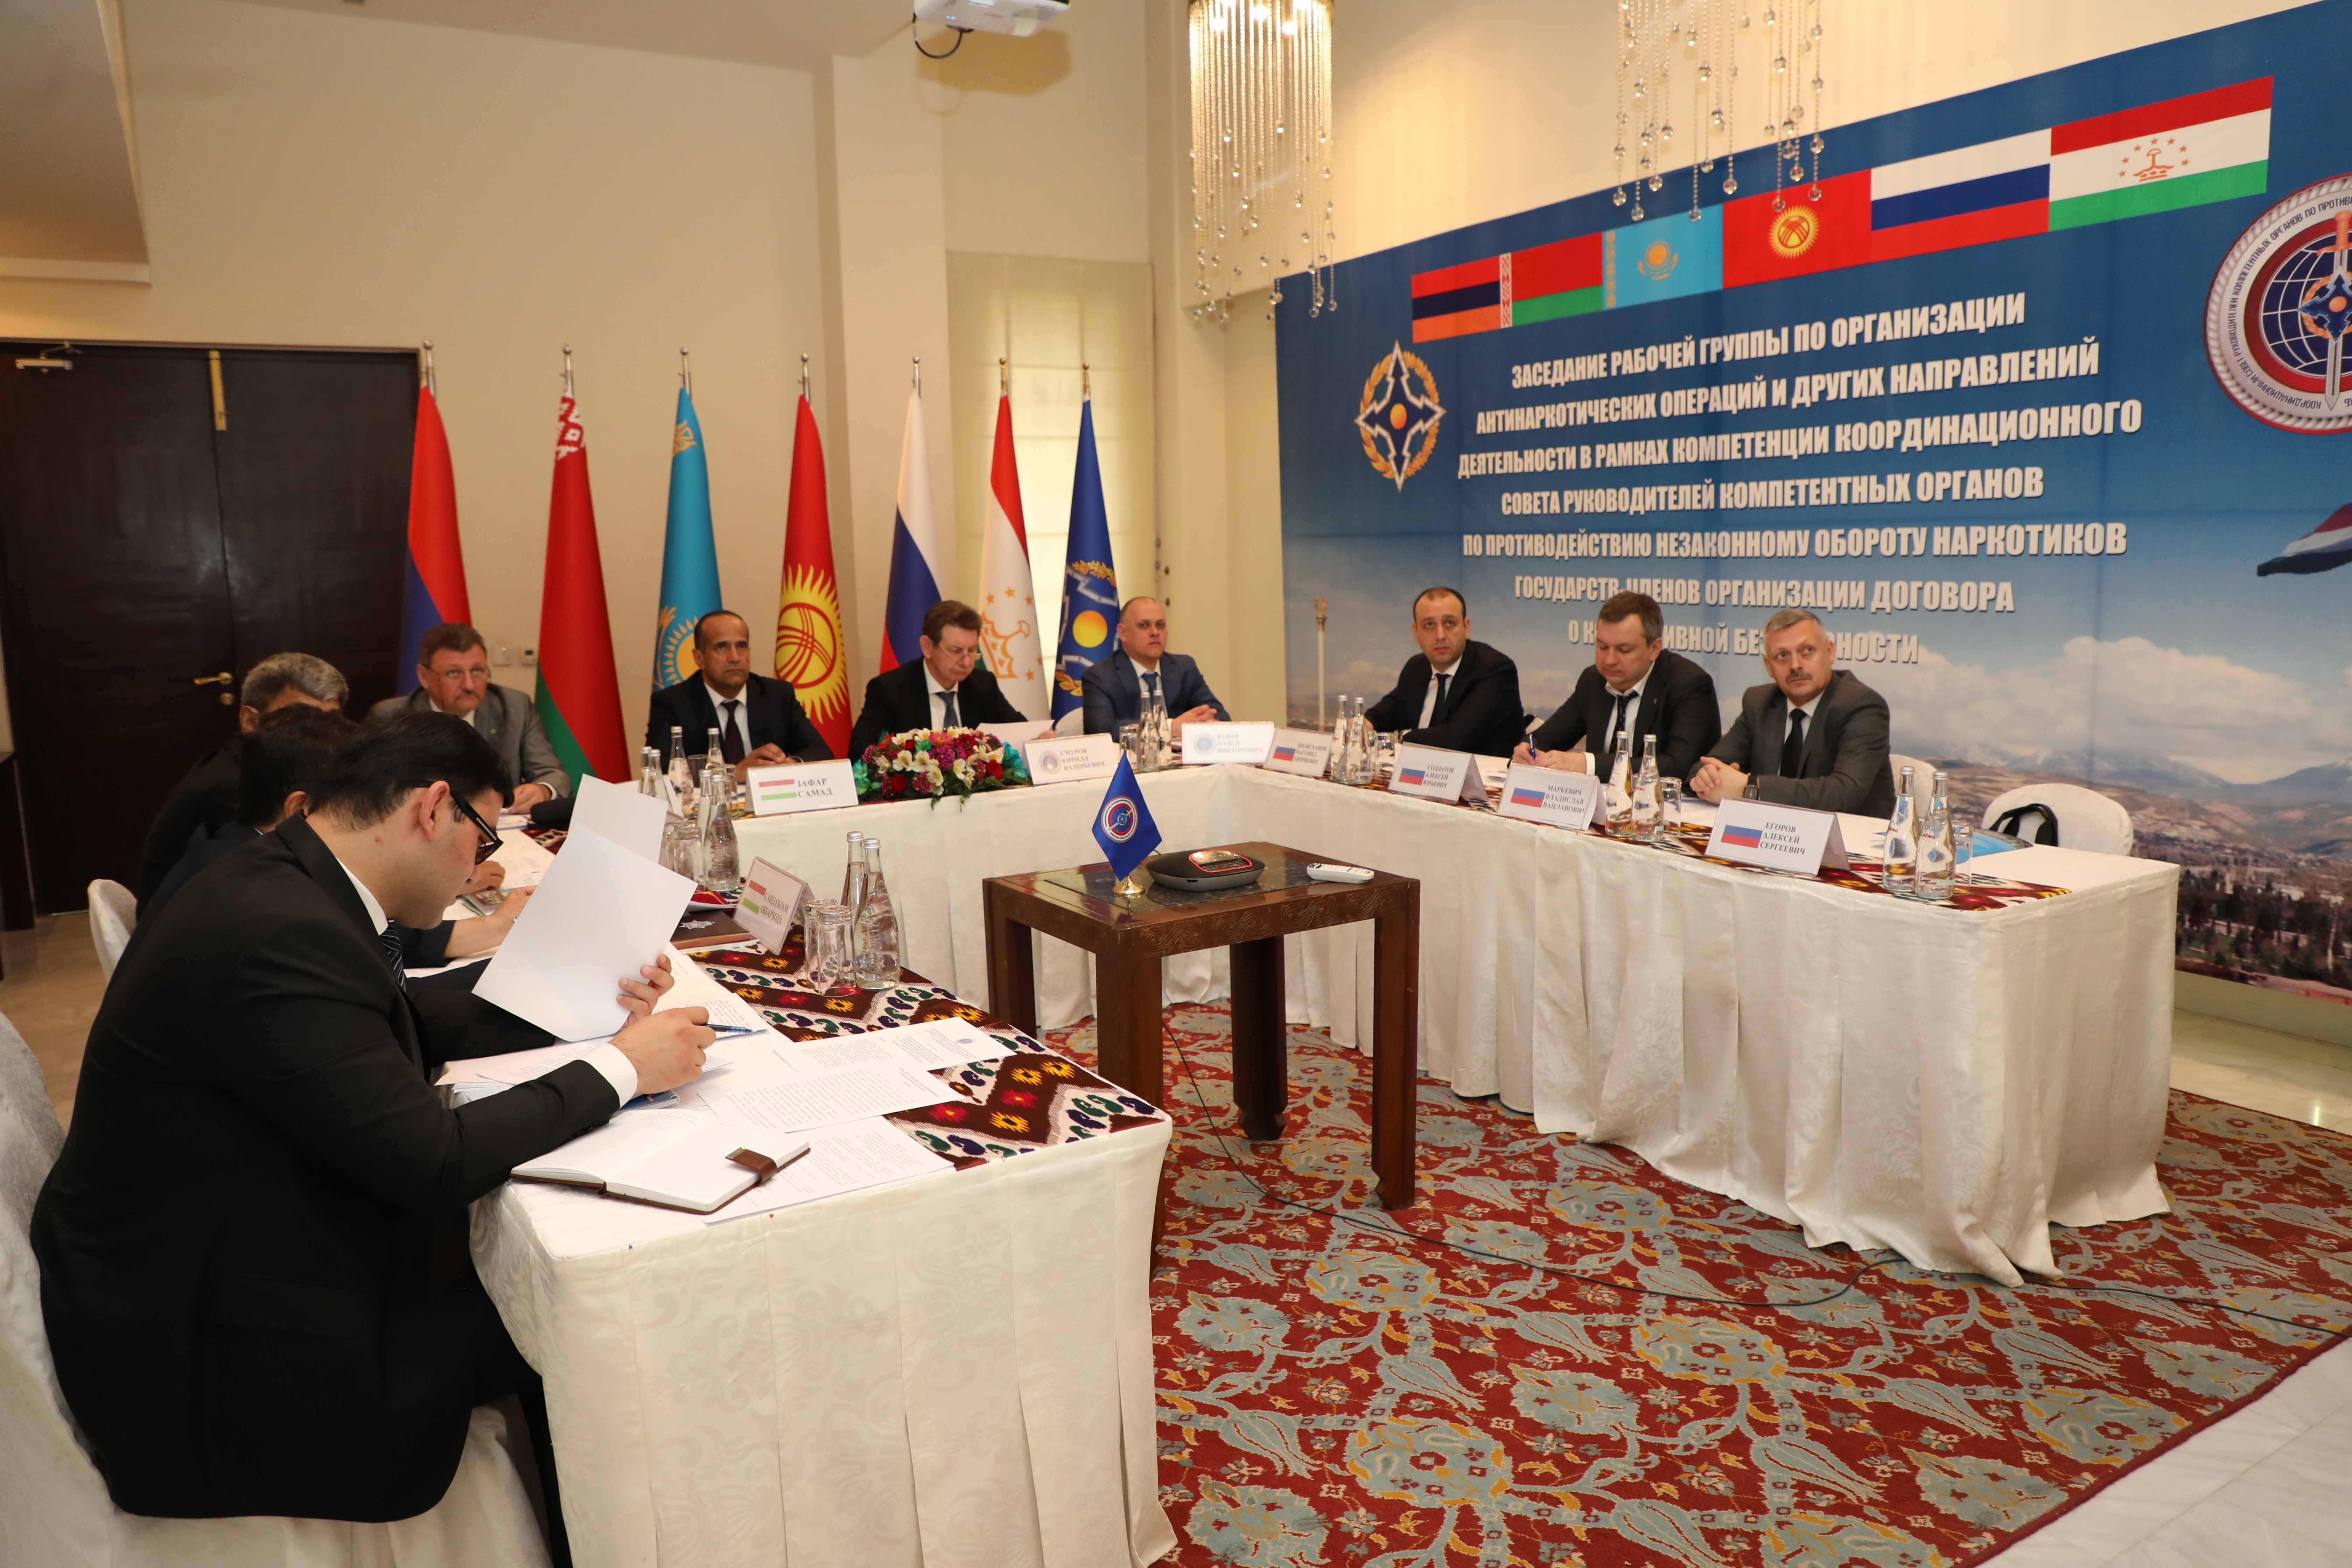 Dushanbe hosted a meeting of the CSTO CCBCD Working Group